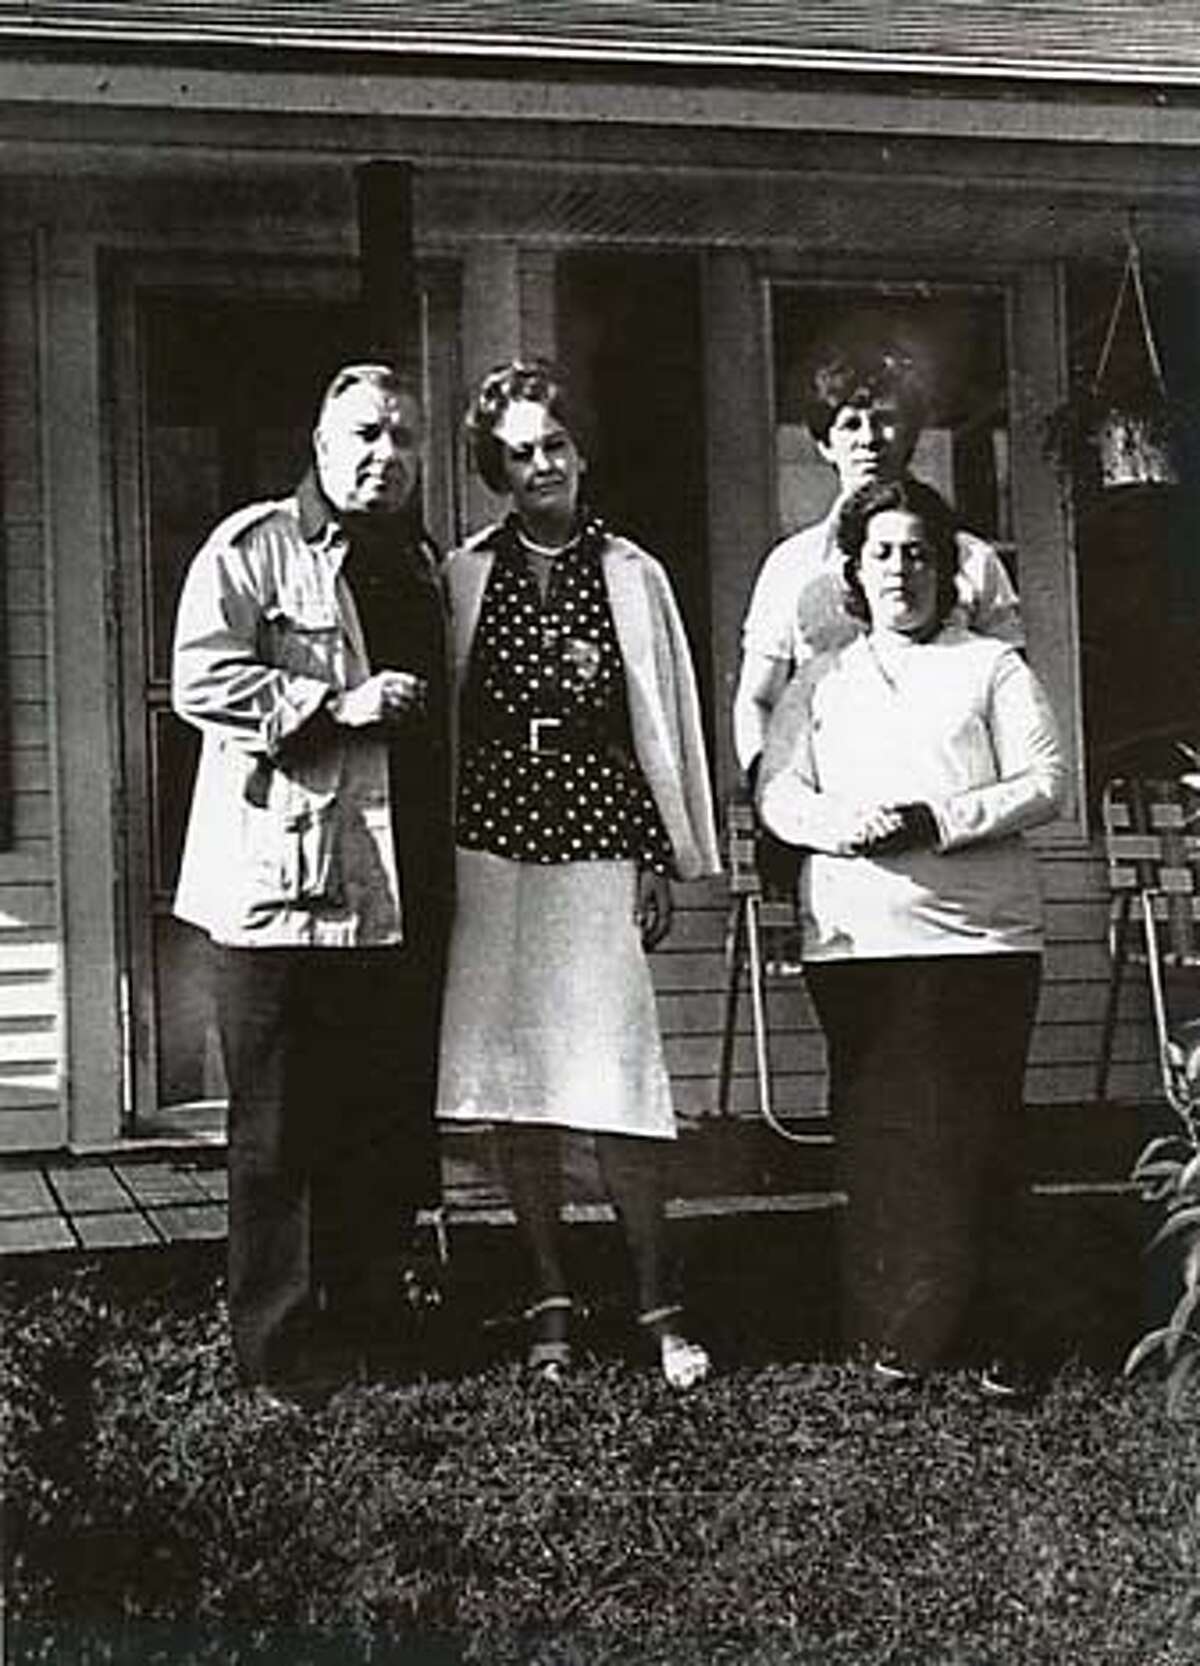 Demonologist Ed and Lorraine Warren (left) with Lui and Dale Passetto, whose home was supposedly inhabited by super natural forces. Credit: UPI 1981.